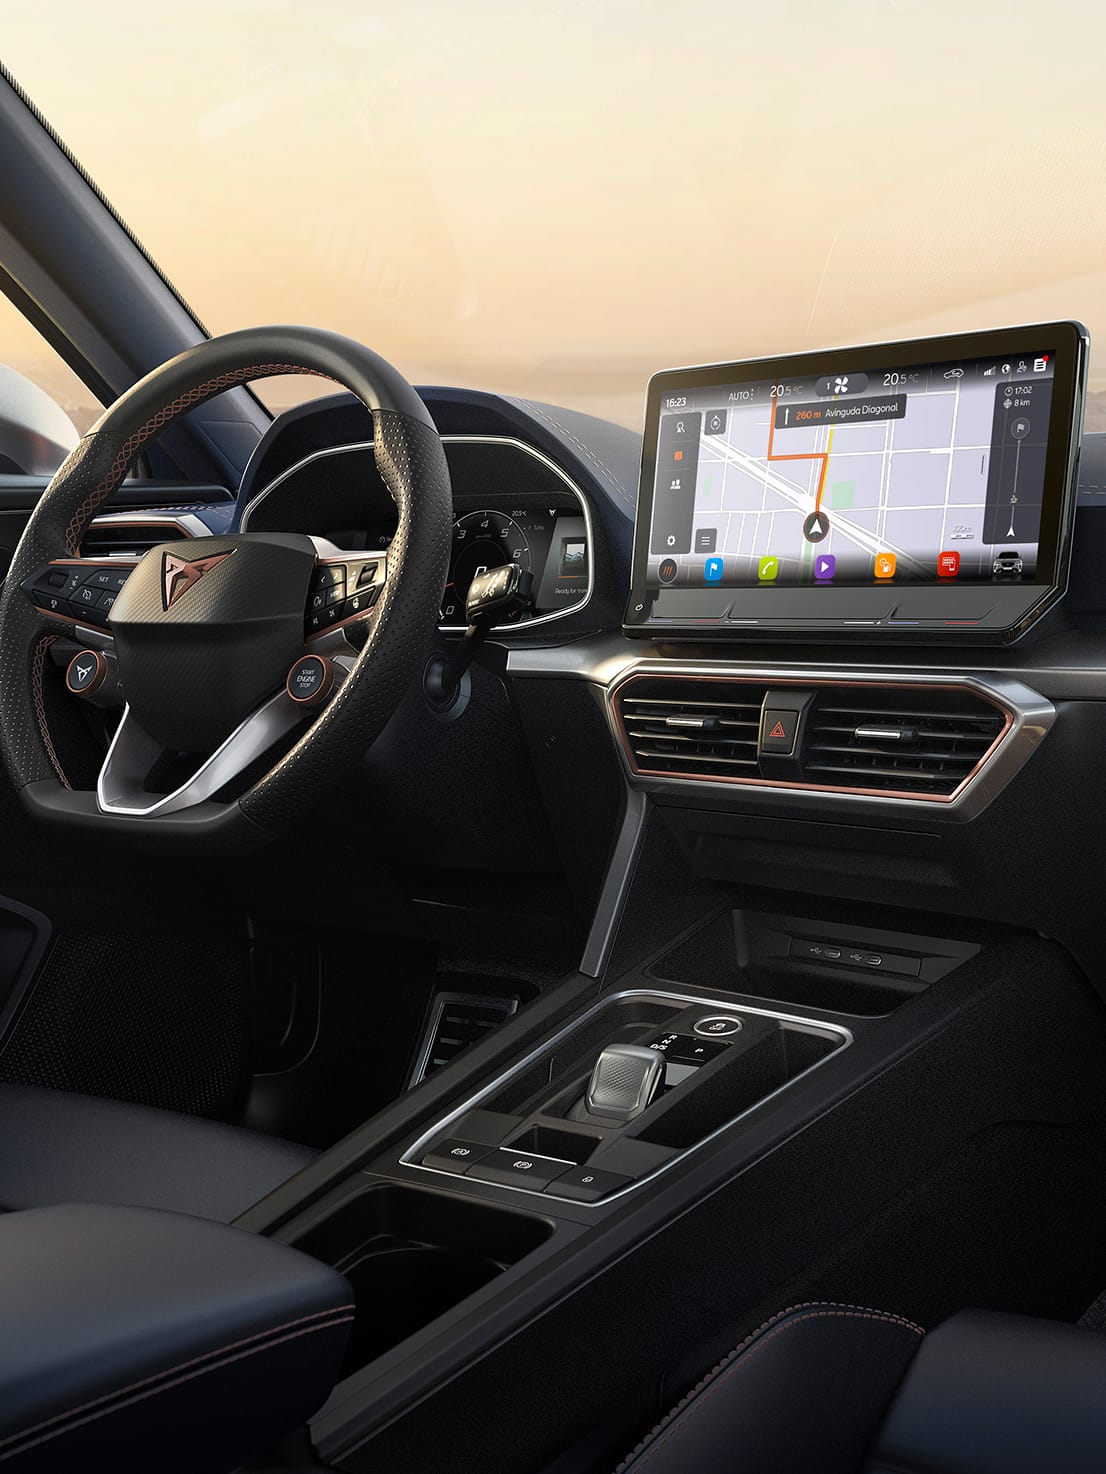 cupra connect voice control infotainment system with real-time traffic updates and alternative route suggestions.